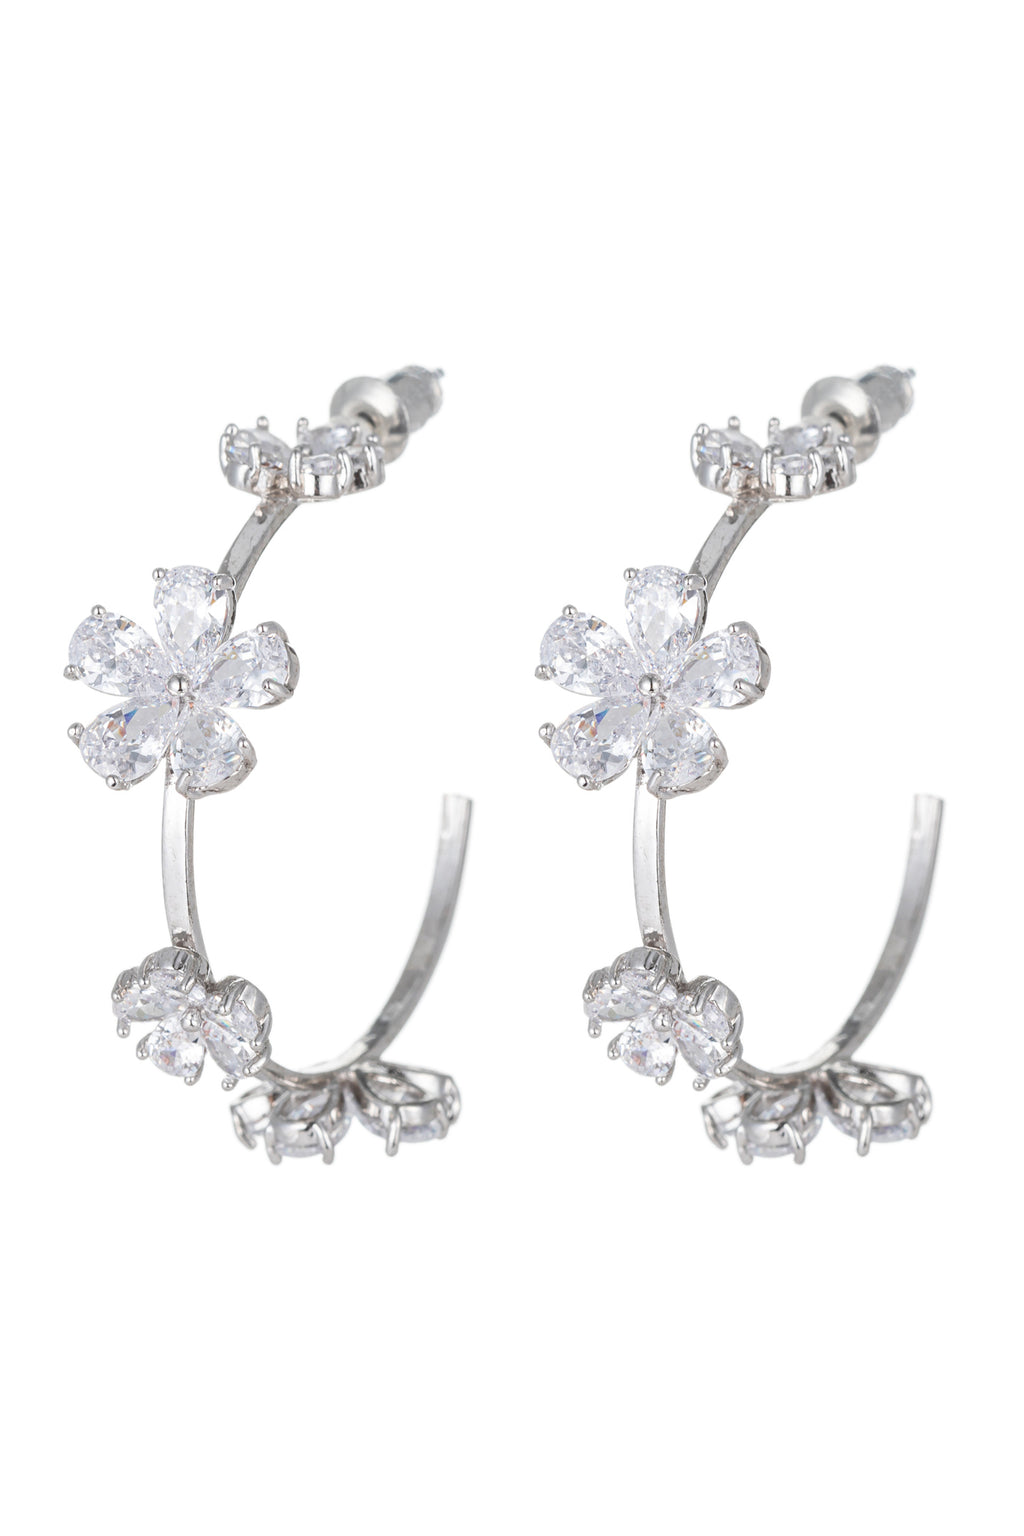 Silver flower earrings studded with CZ crystals.